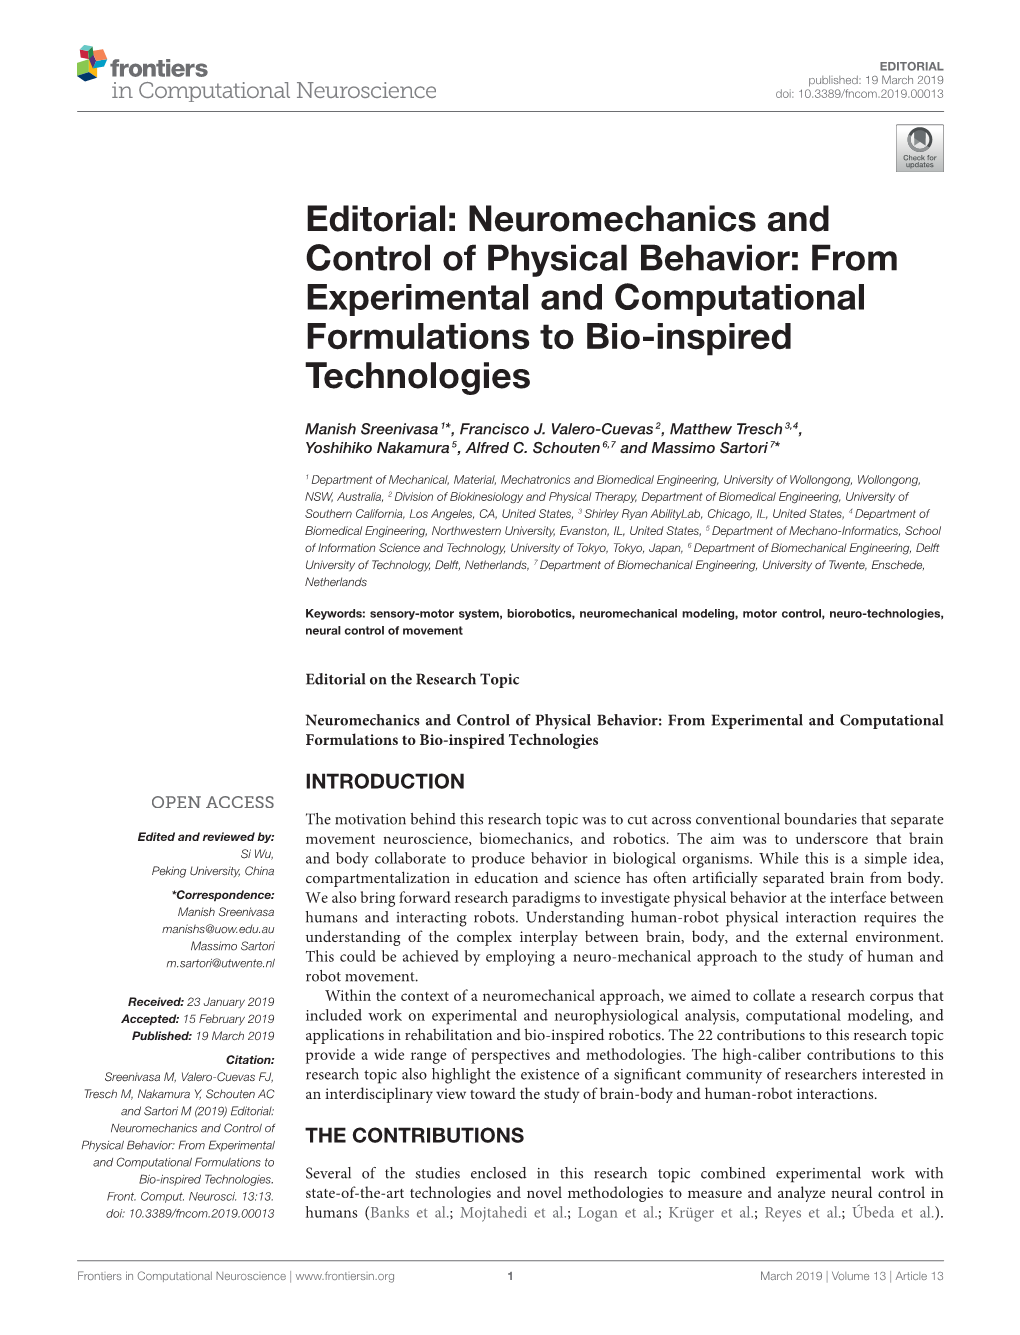 Neuromechanics and Control of Physical Behavior: from Experimental and Computational Formulations to Bio-Inspired Technologies